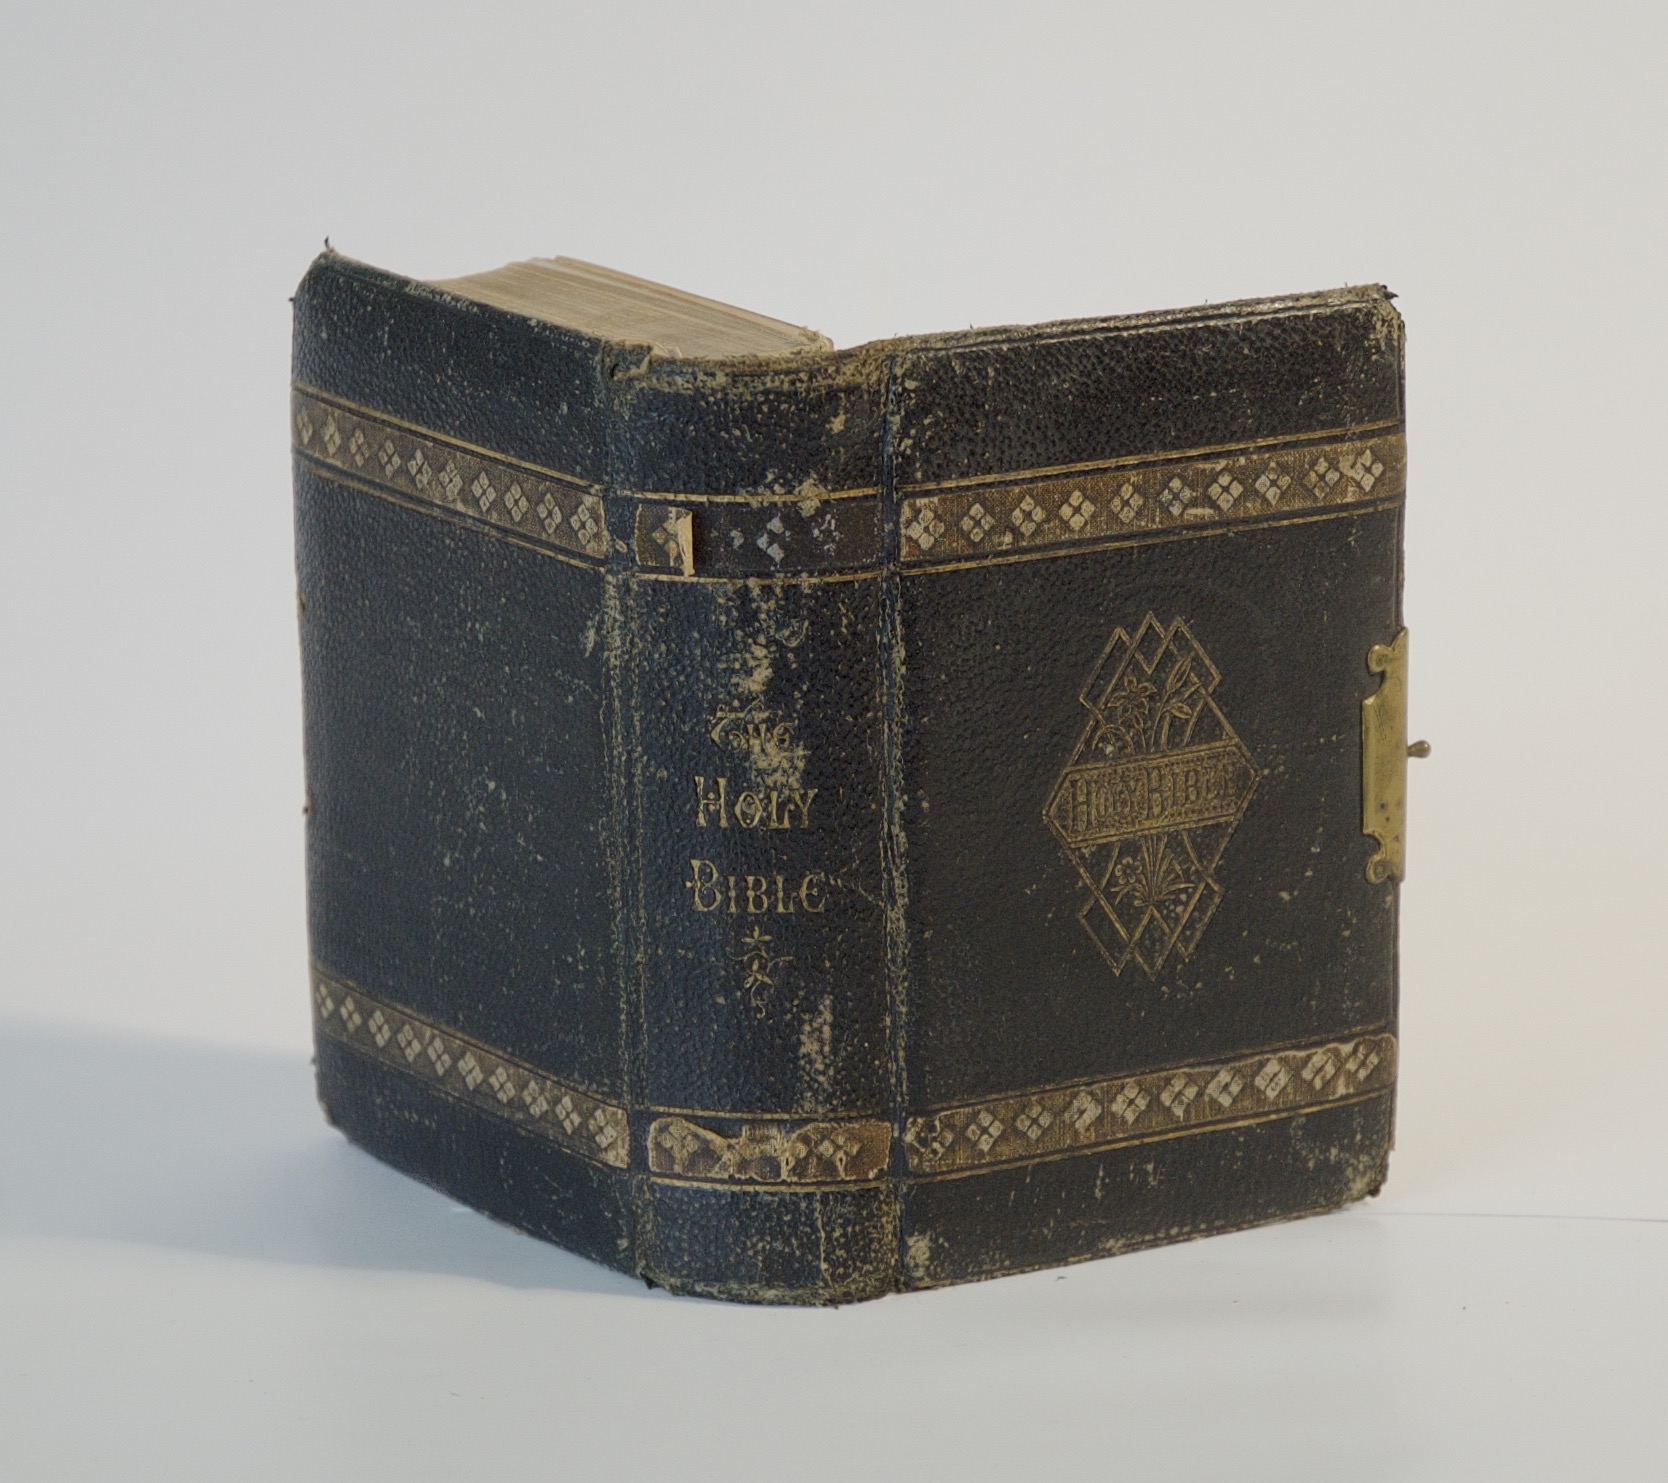 Small hand held Bible in very delicate condition.